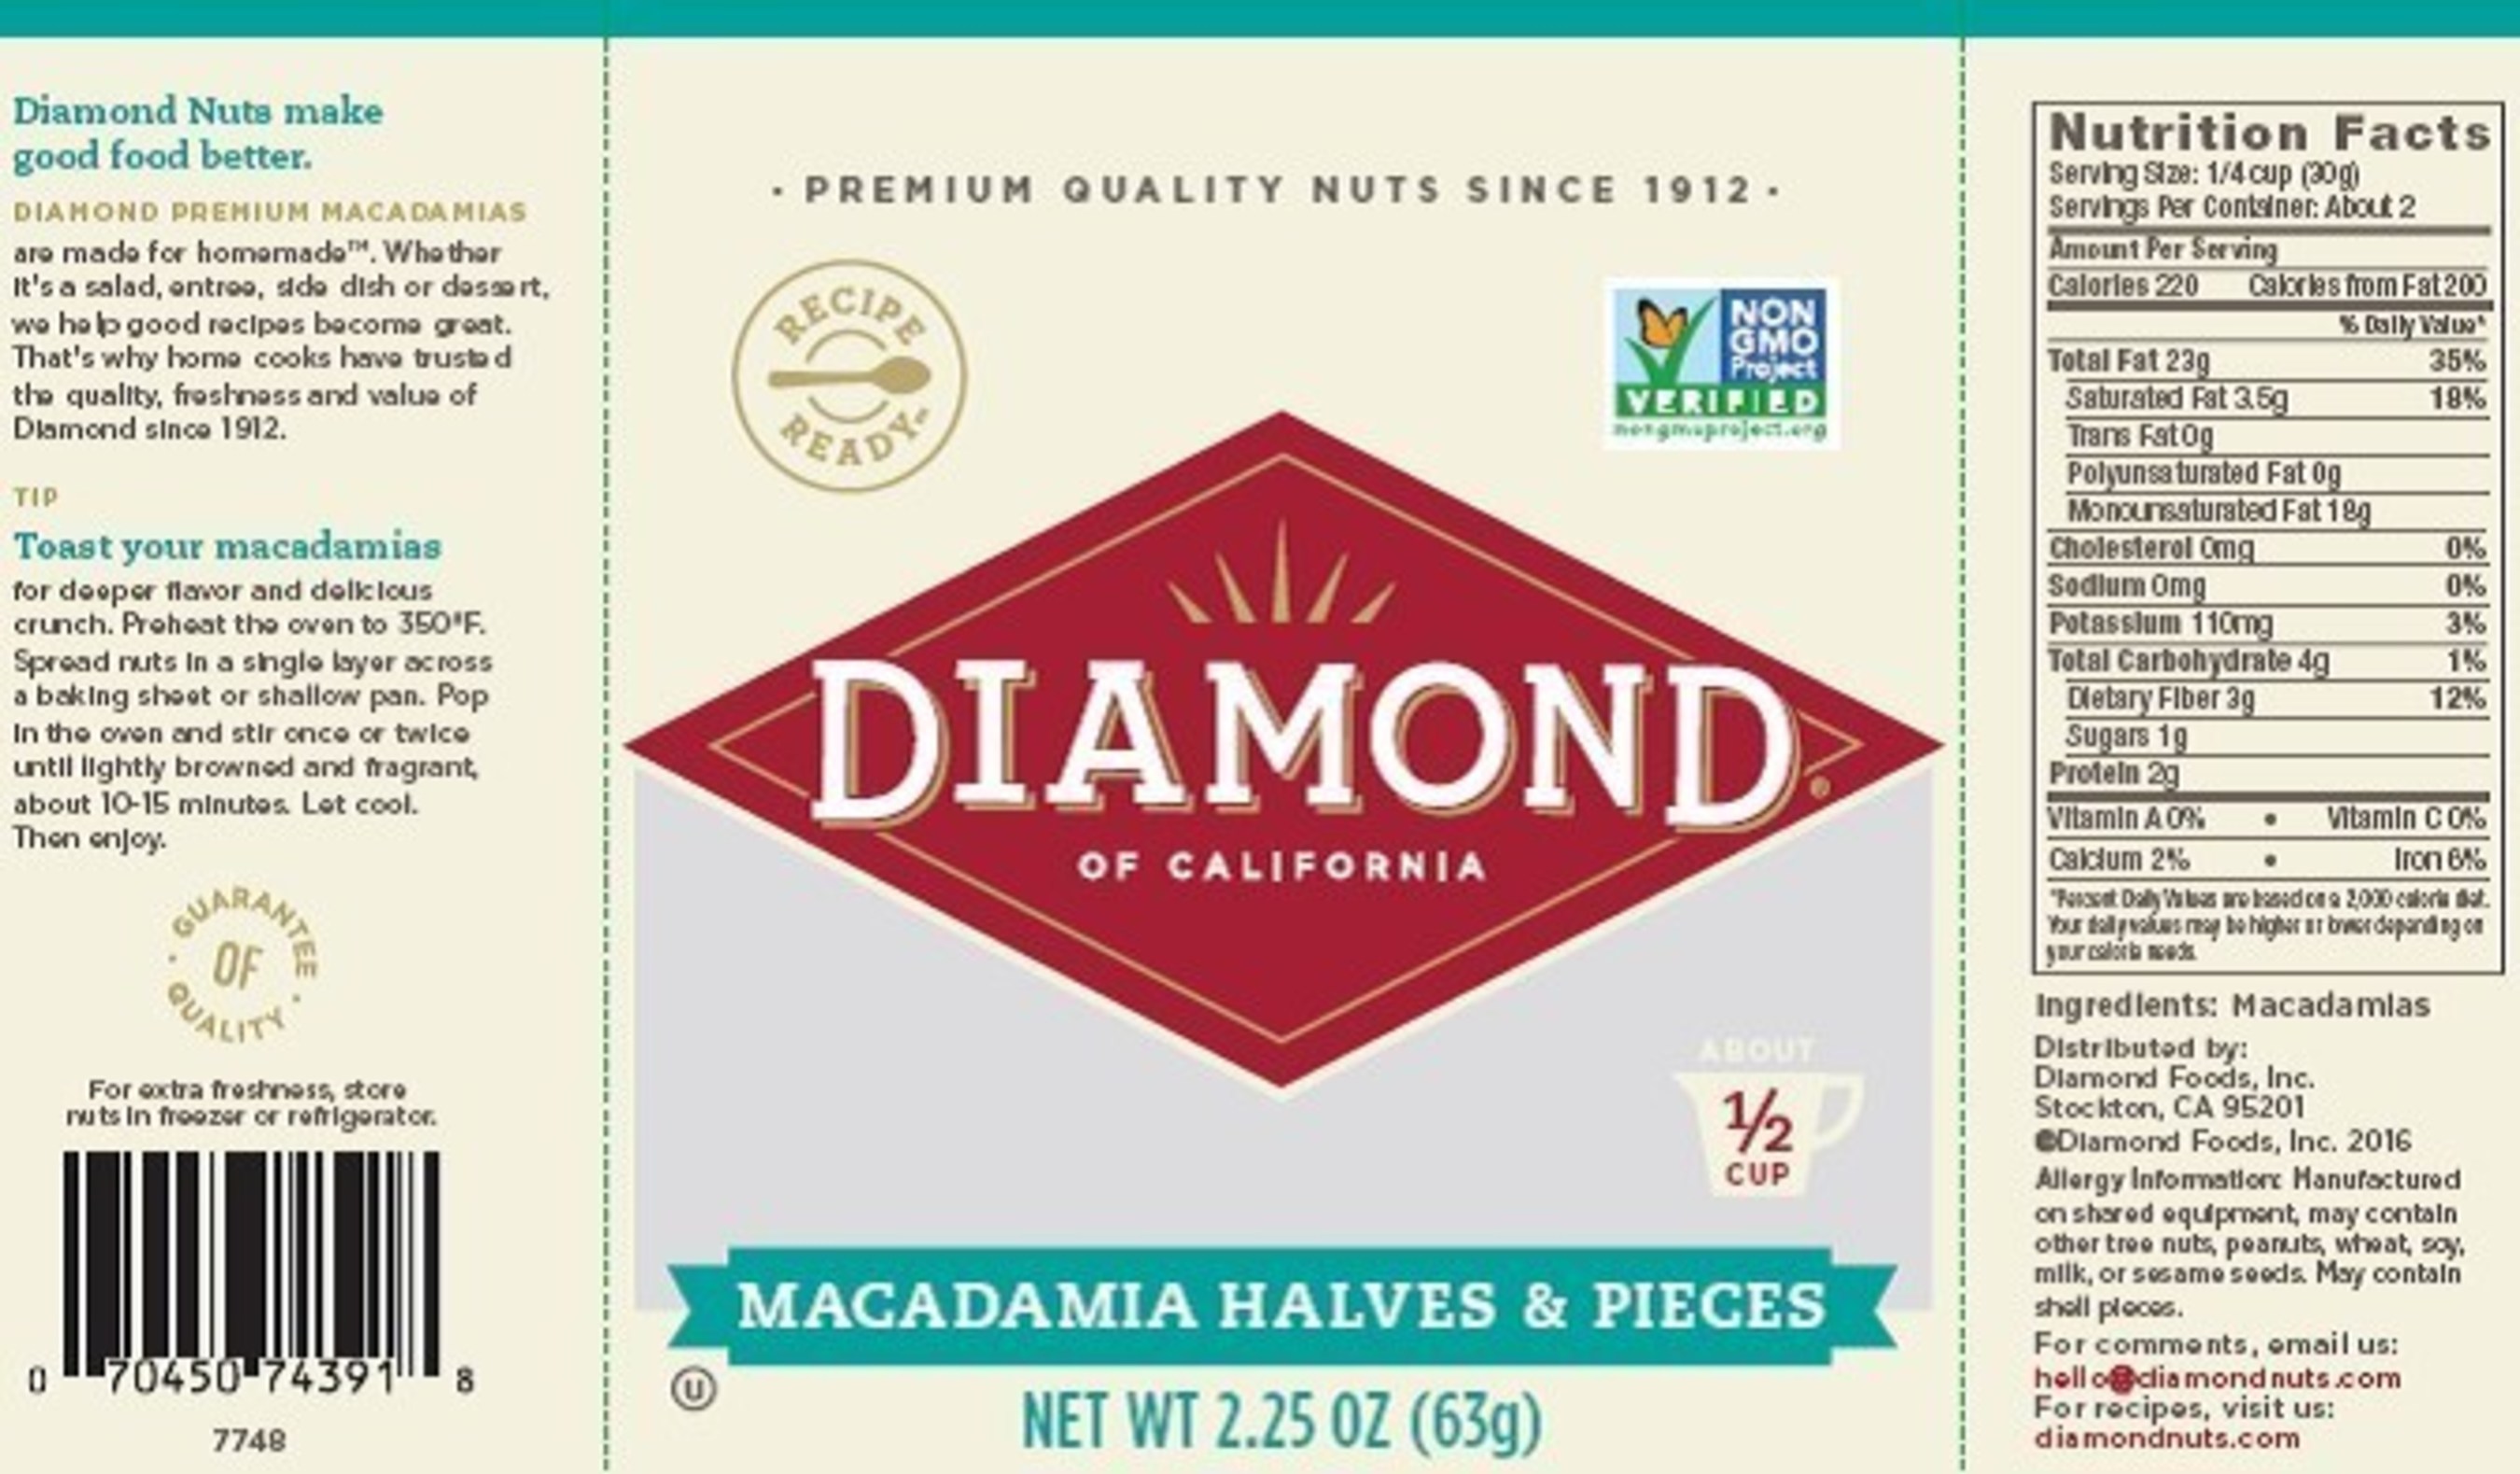 Diamond of California(R) Macadamia Halves and Pieces 2.25oz packages